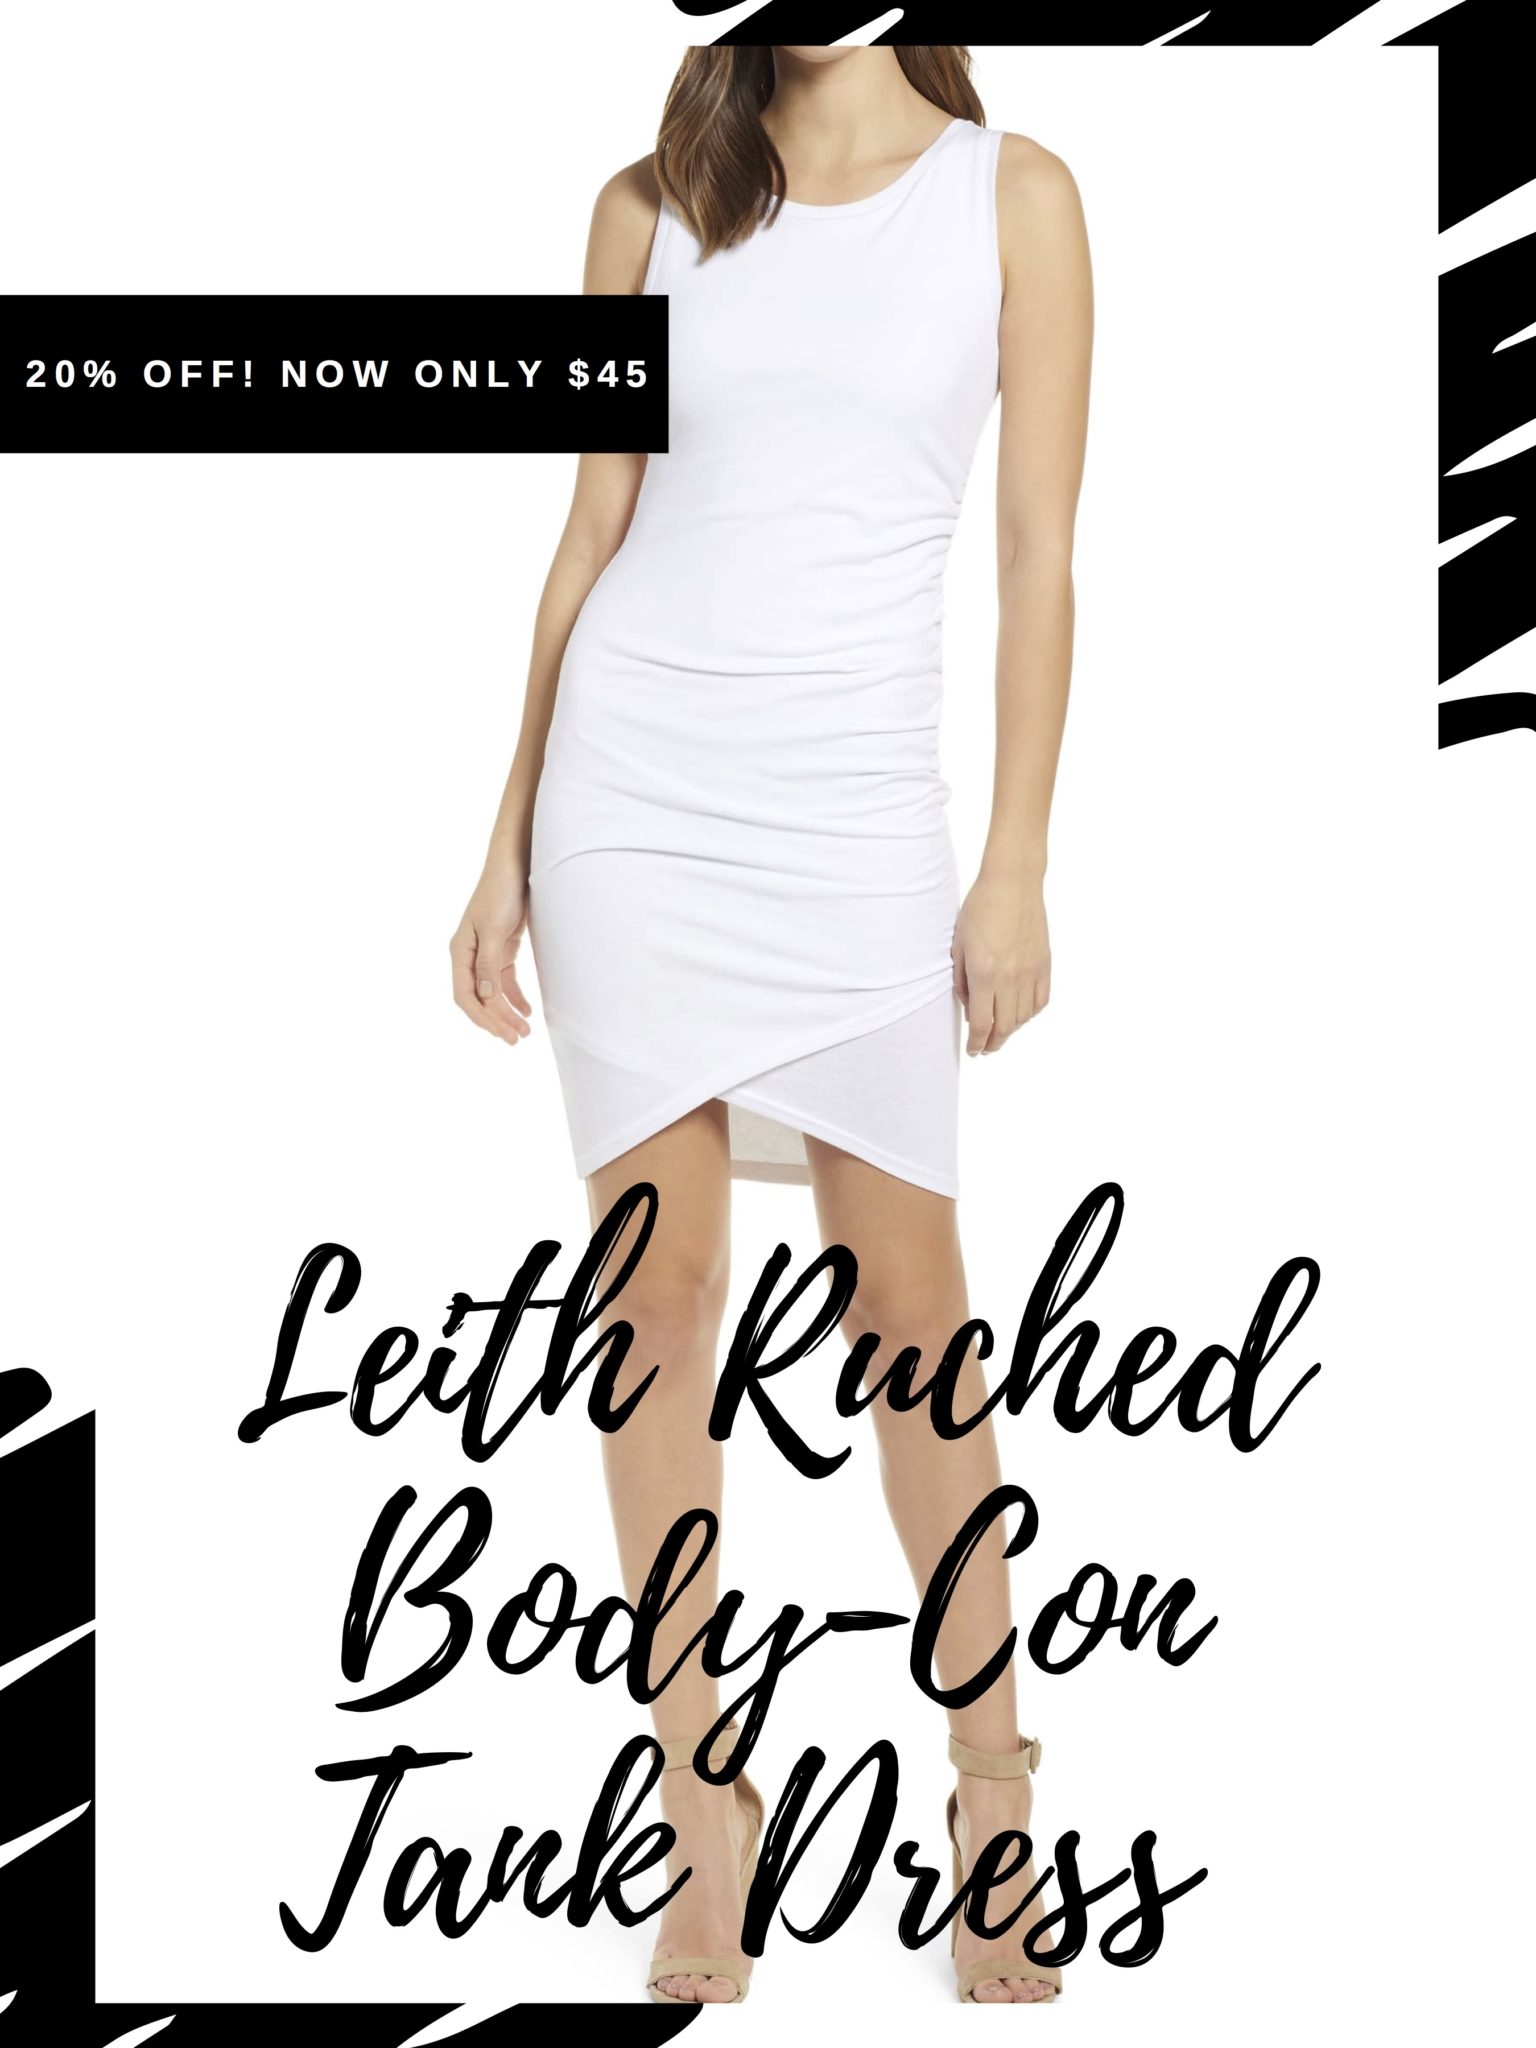 Sale Alert - Two Must Have Versatile Dresses for Summer by popular Austin fashion blog, Dressed to Kill: catalogue image of Leith Ruched Body-Con Tank Dress